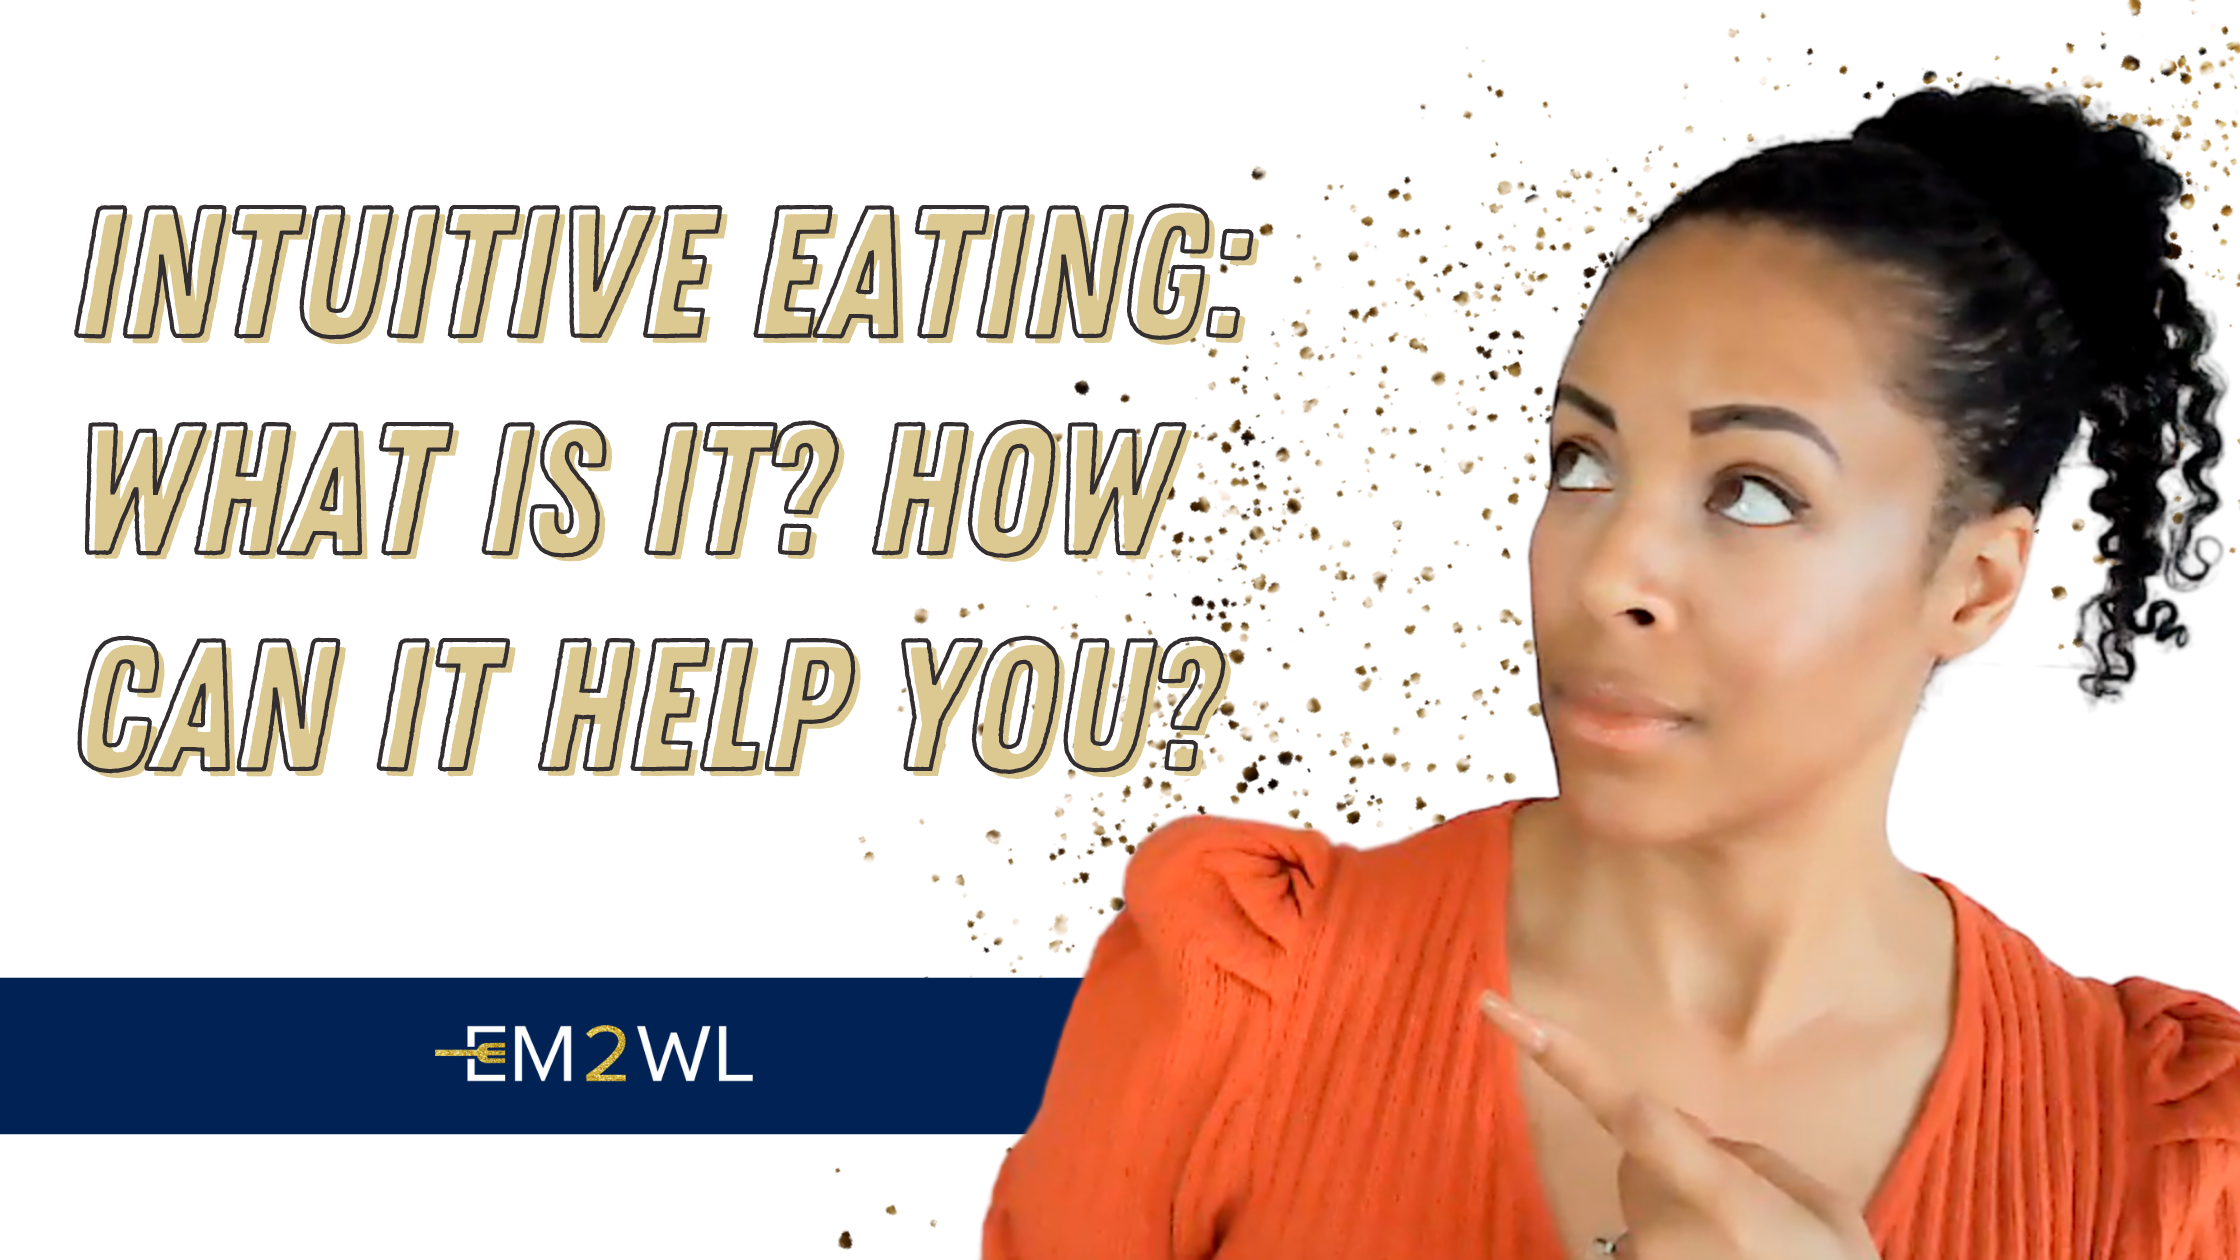 Intuitive Eating: What is it, and How Can It Help You?